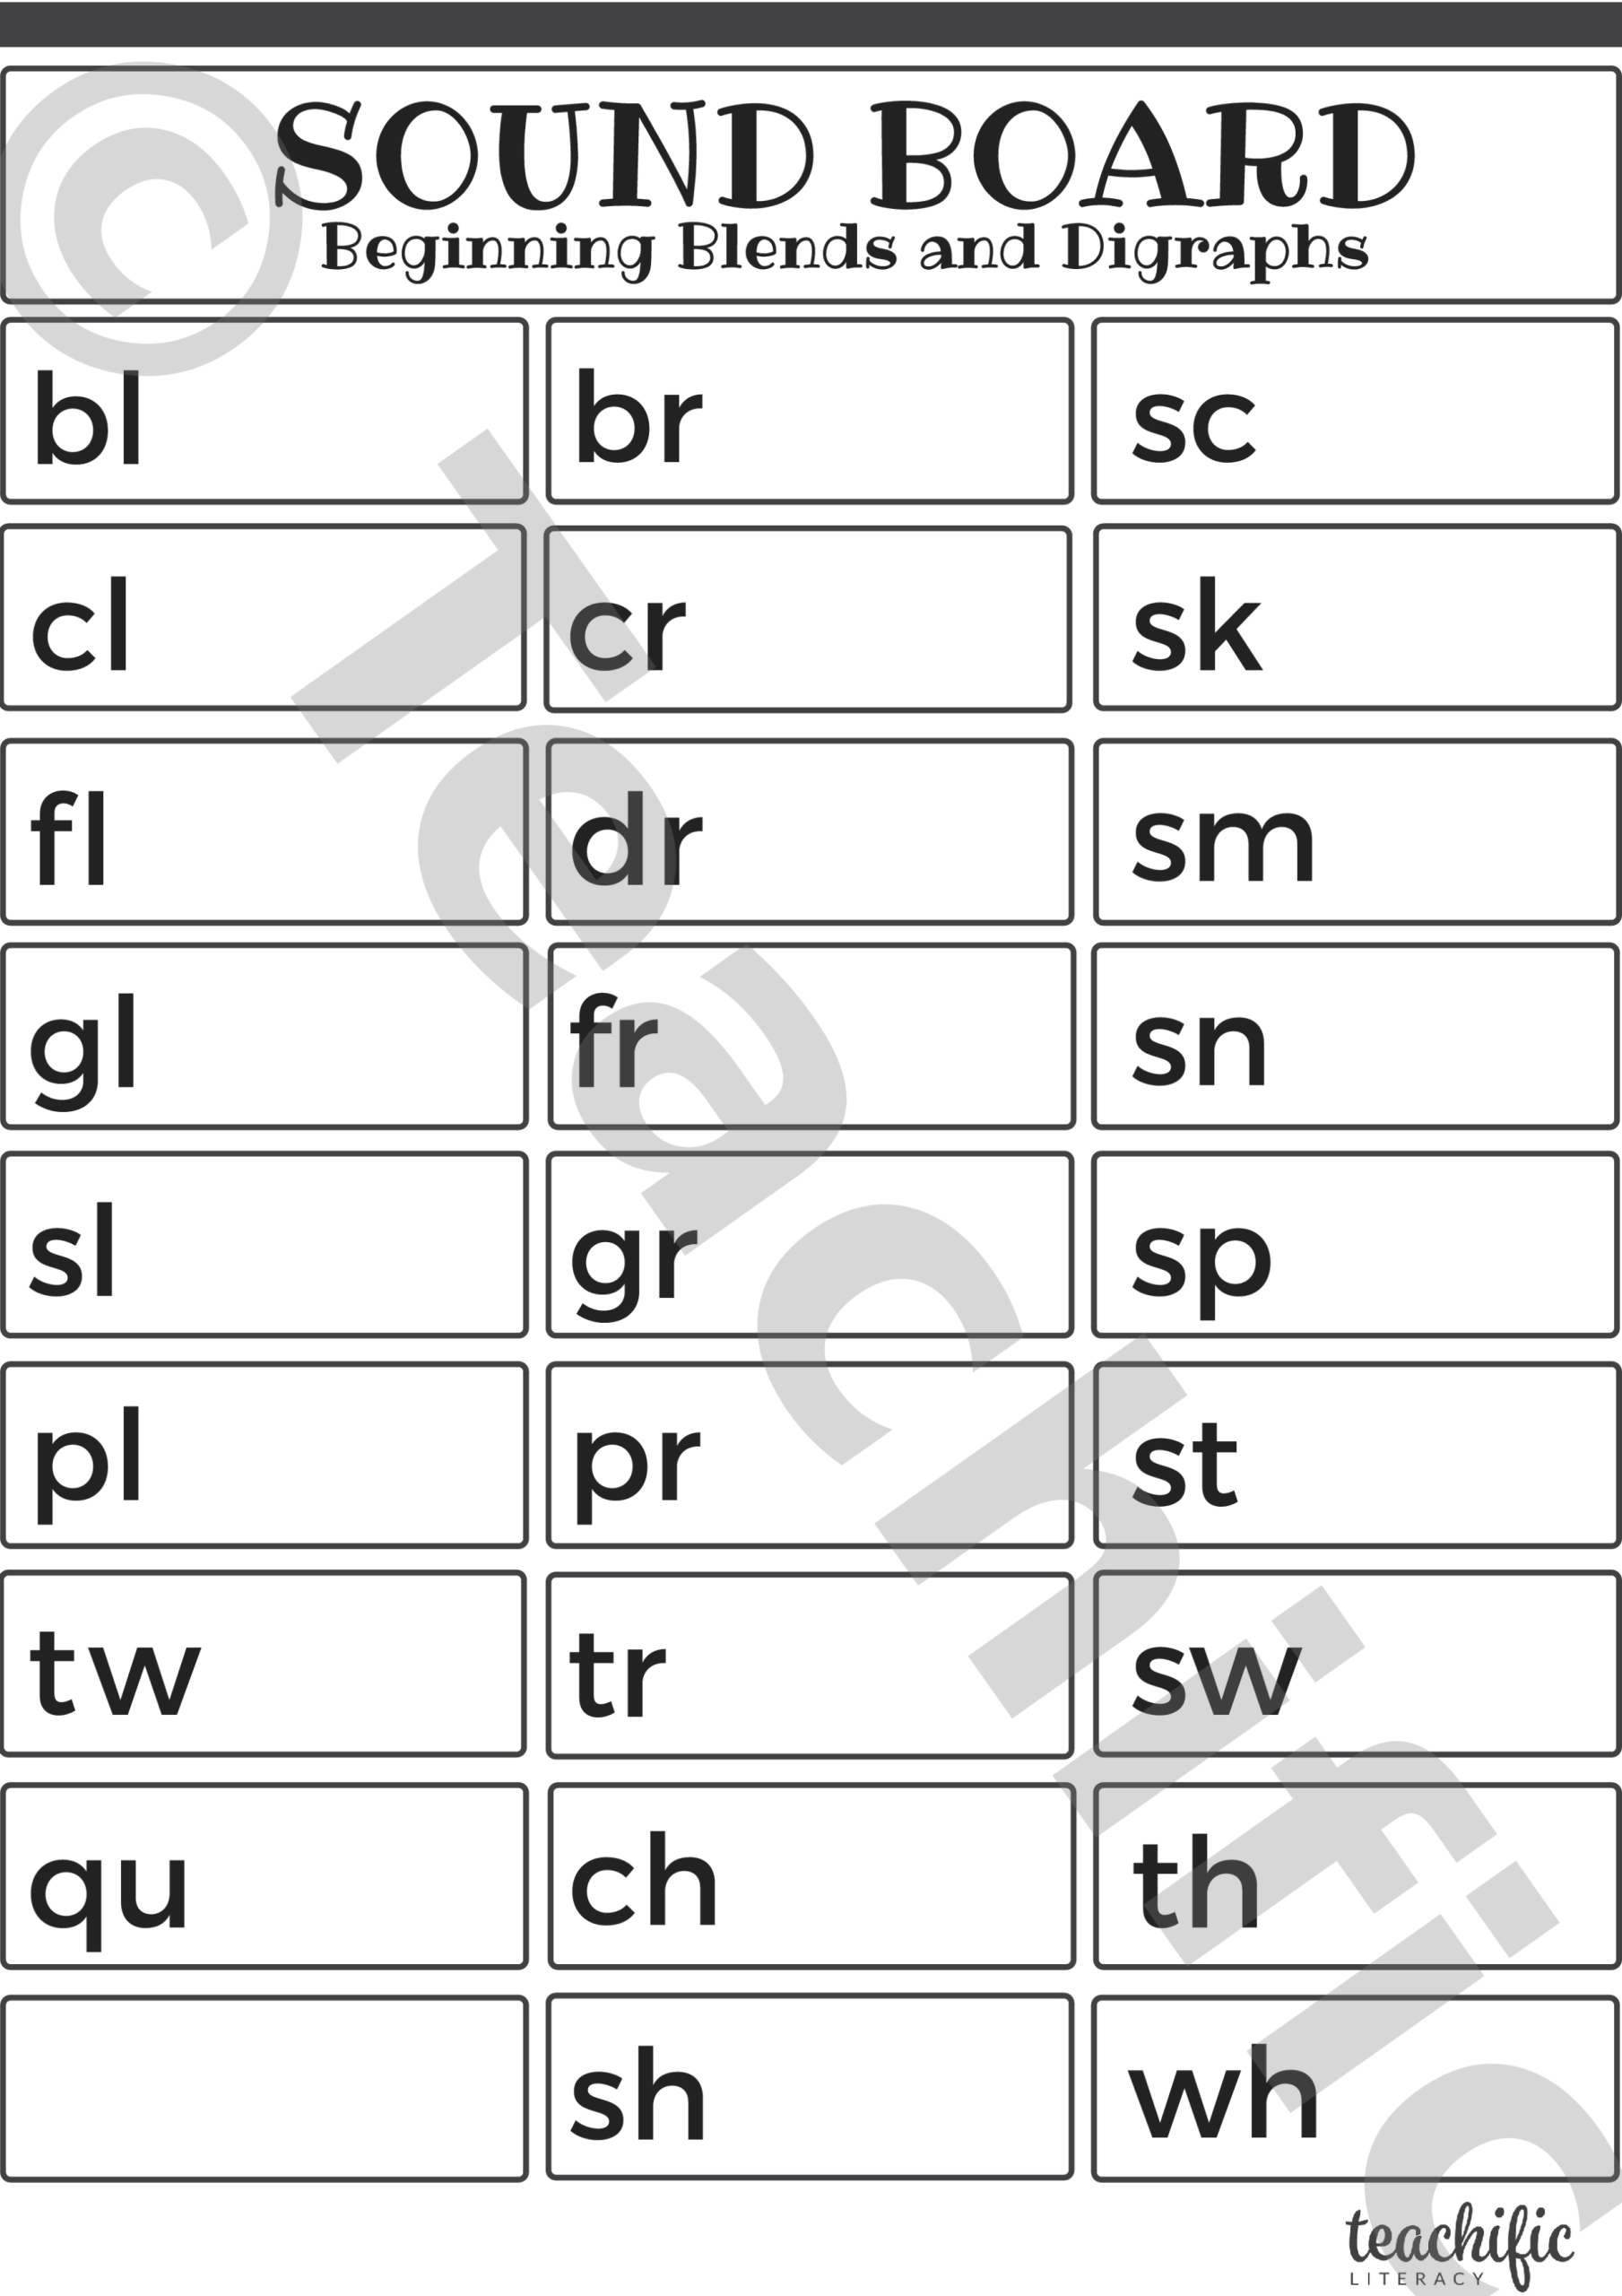 Personal Word Wall Add On: Blends &amp; Digraphs Sound Board - Make Your Own | Teachific inside Personal Word Wall Template